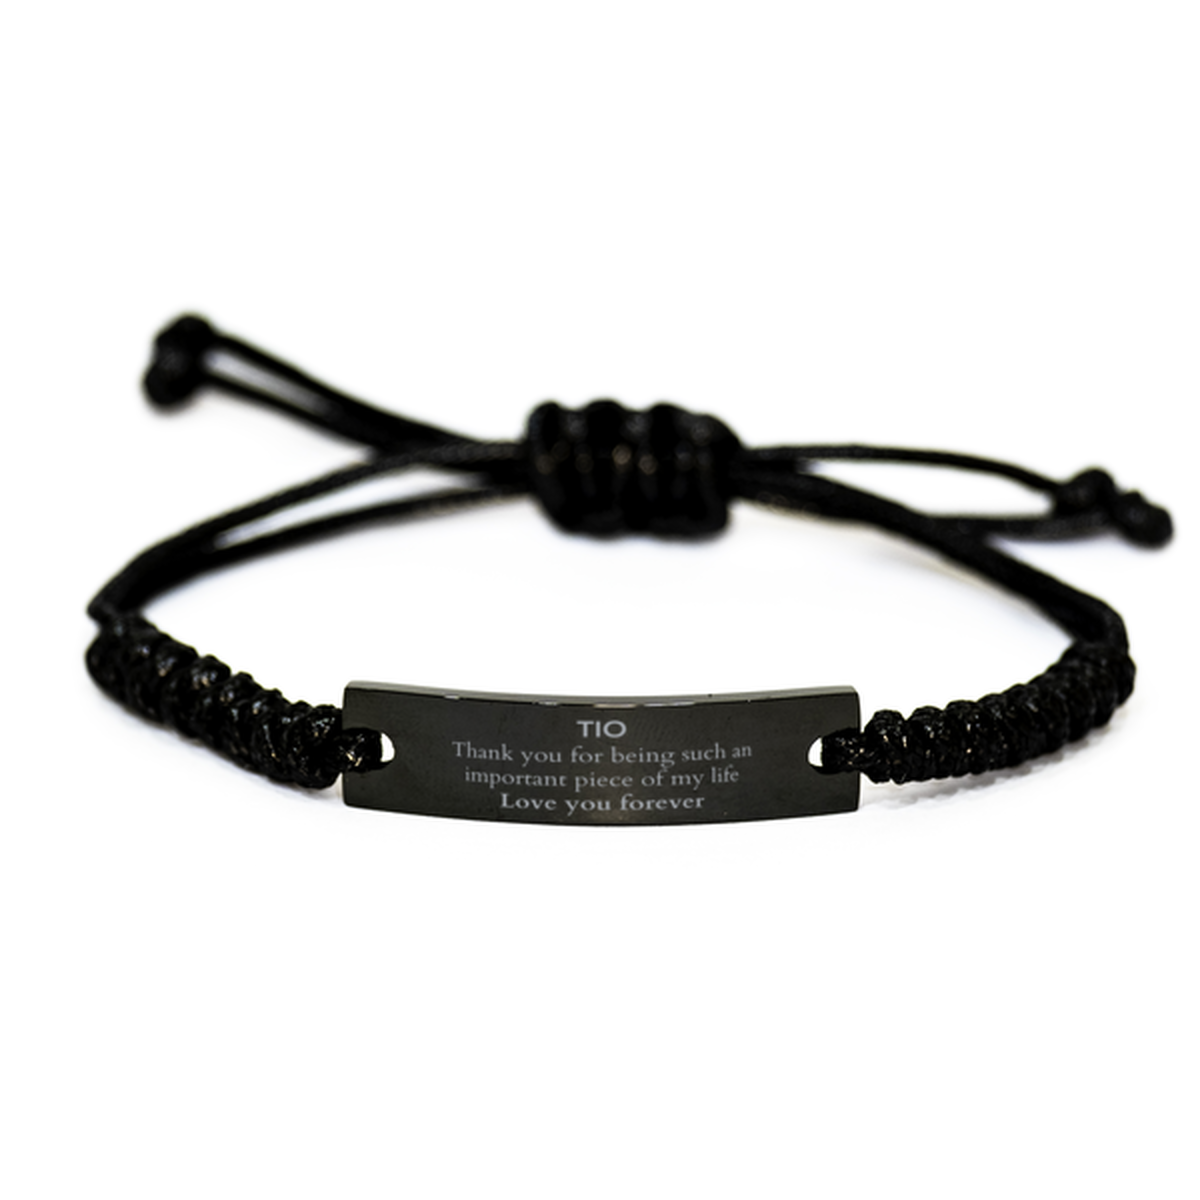 Appropriate Tio Black Rope Bracelet Epic Birthday Gifts for Tio Thank you for being such an important piece of my life Tio Christmas Mothers Fathers Day